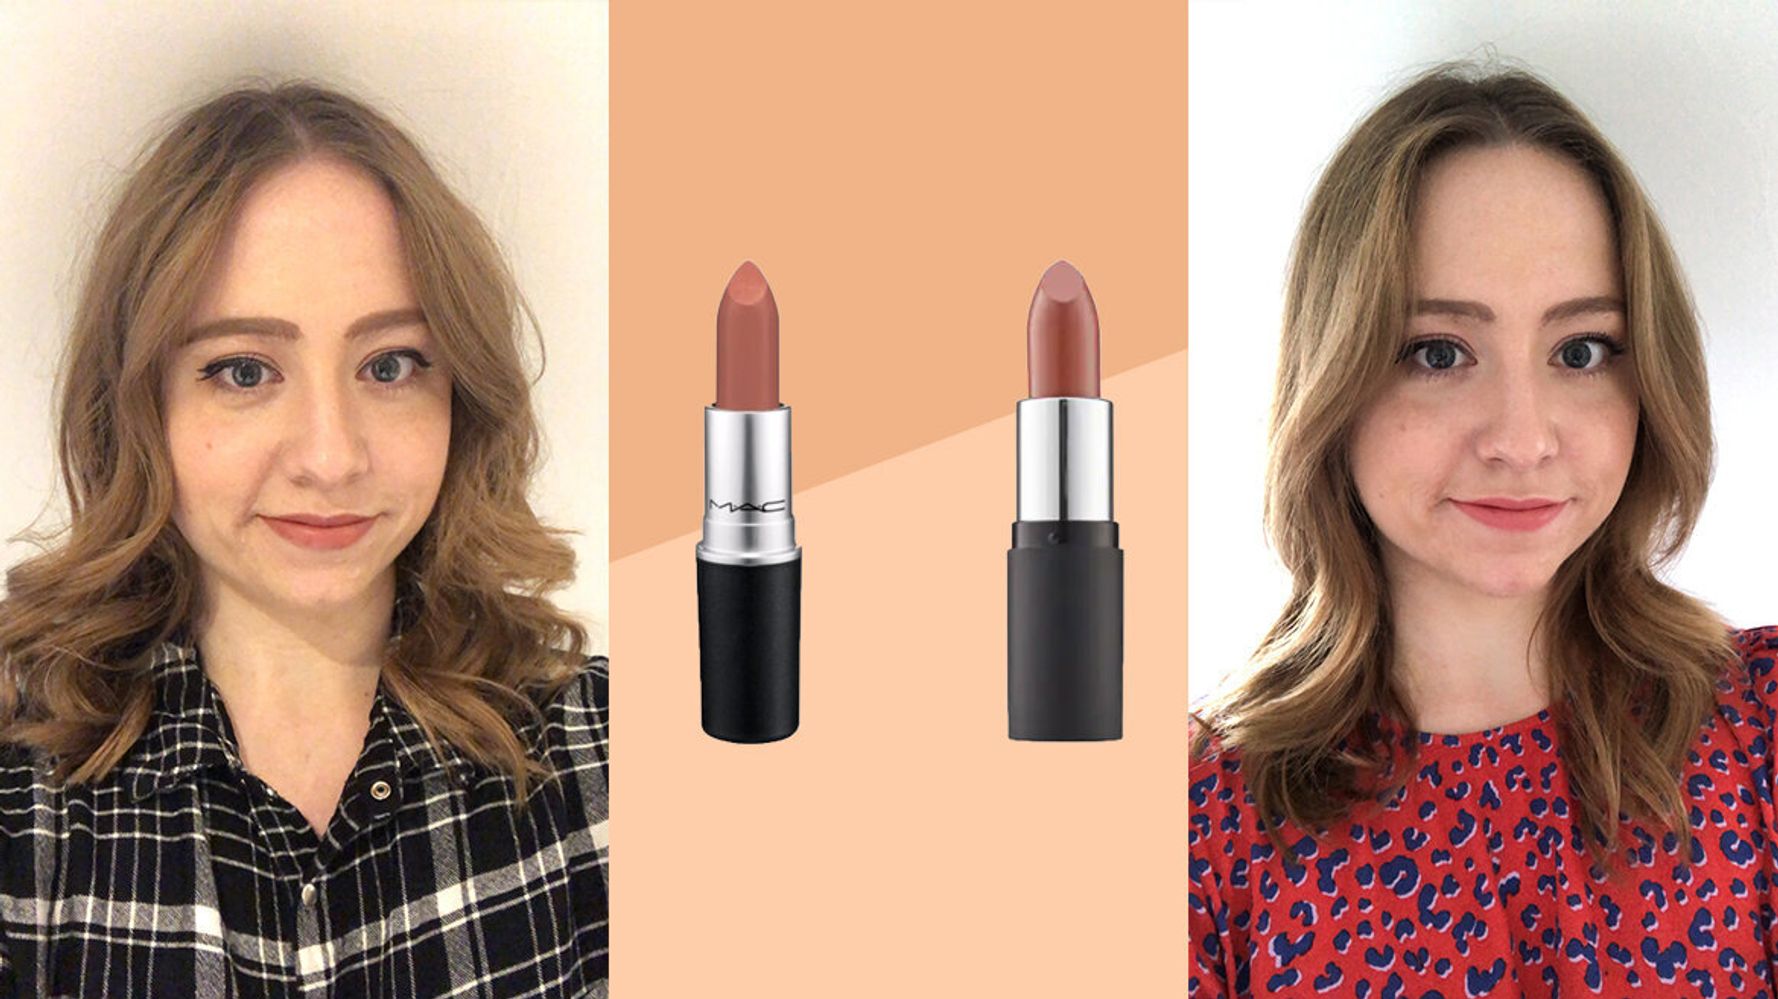 How Does MAC's Velvet Teddy Lipstick Compare To The Body Shop's